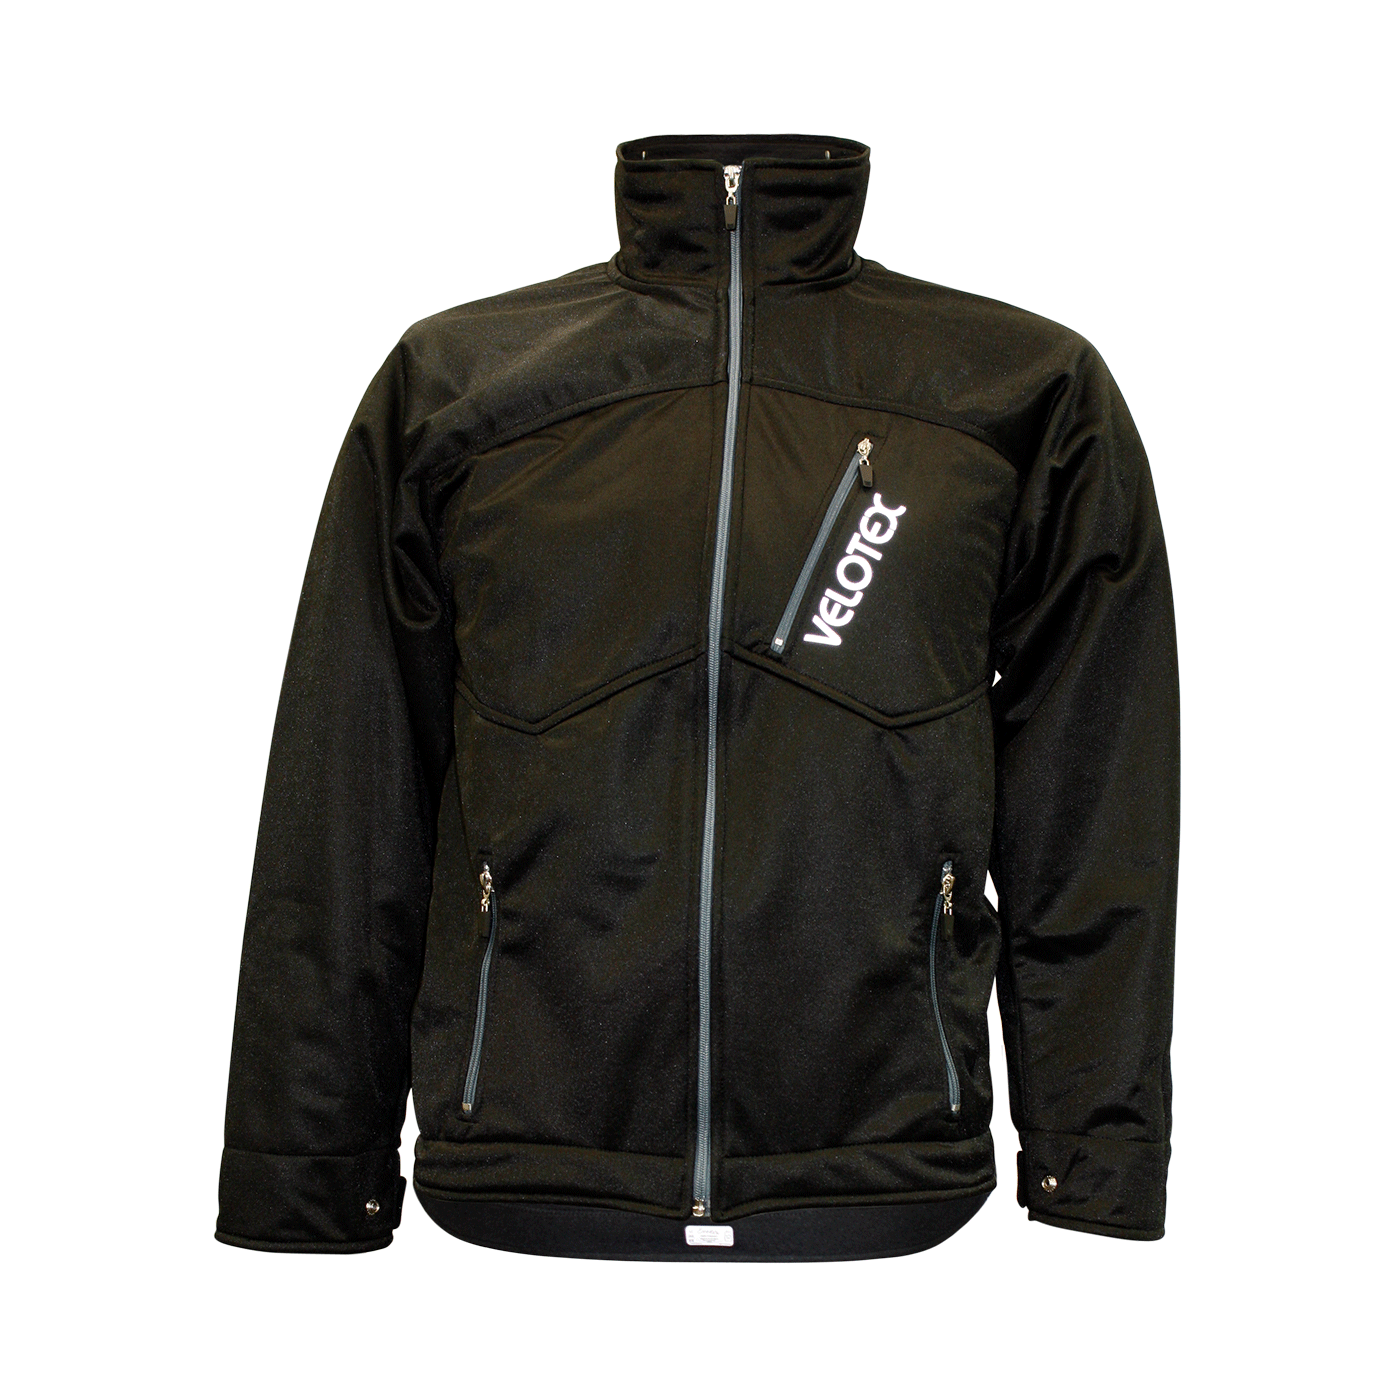 VT3 Rally Jacket TrimaX